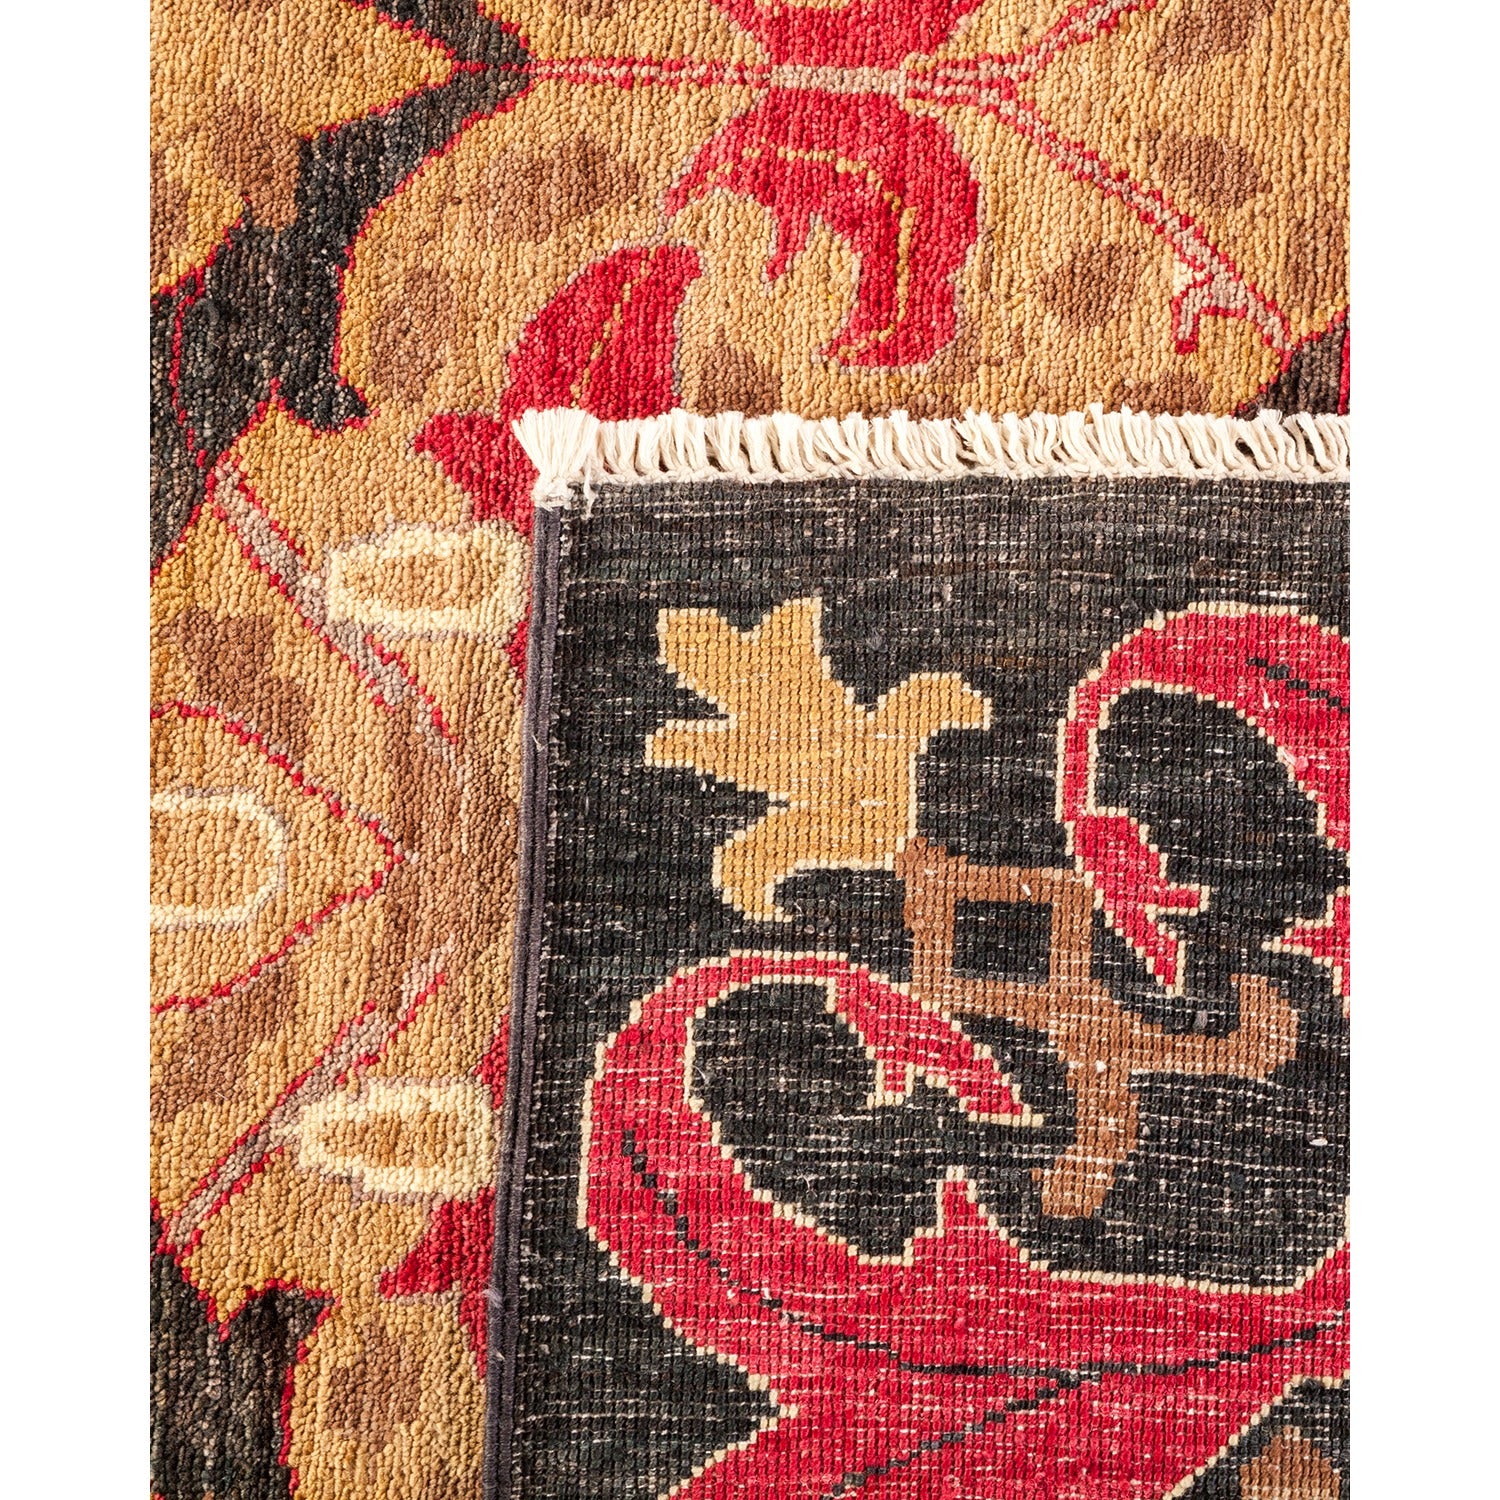 Close-up of a vibrant, handwoven textile with intricate floral patterns